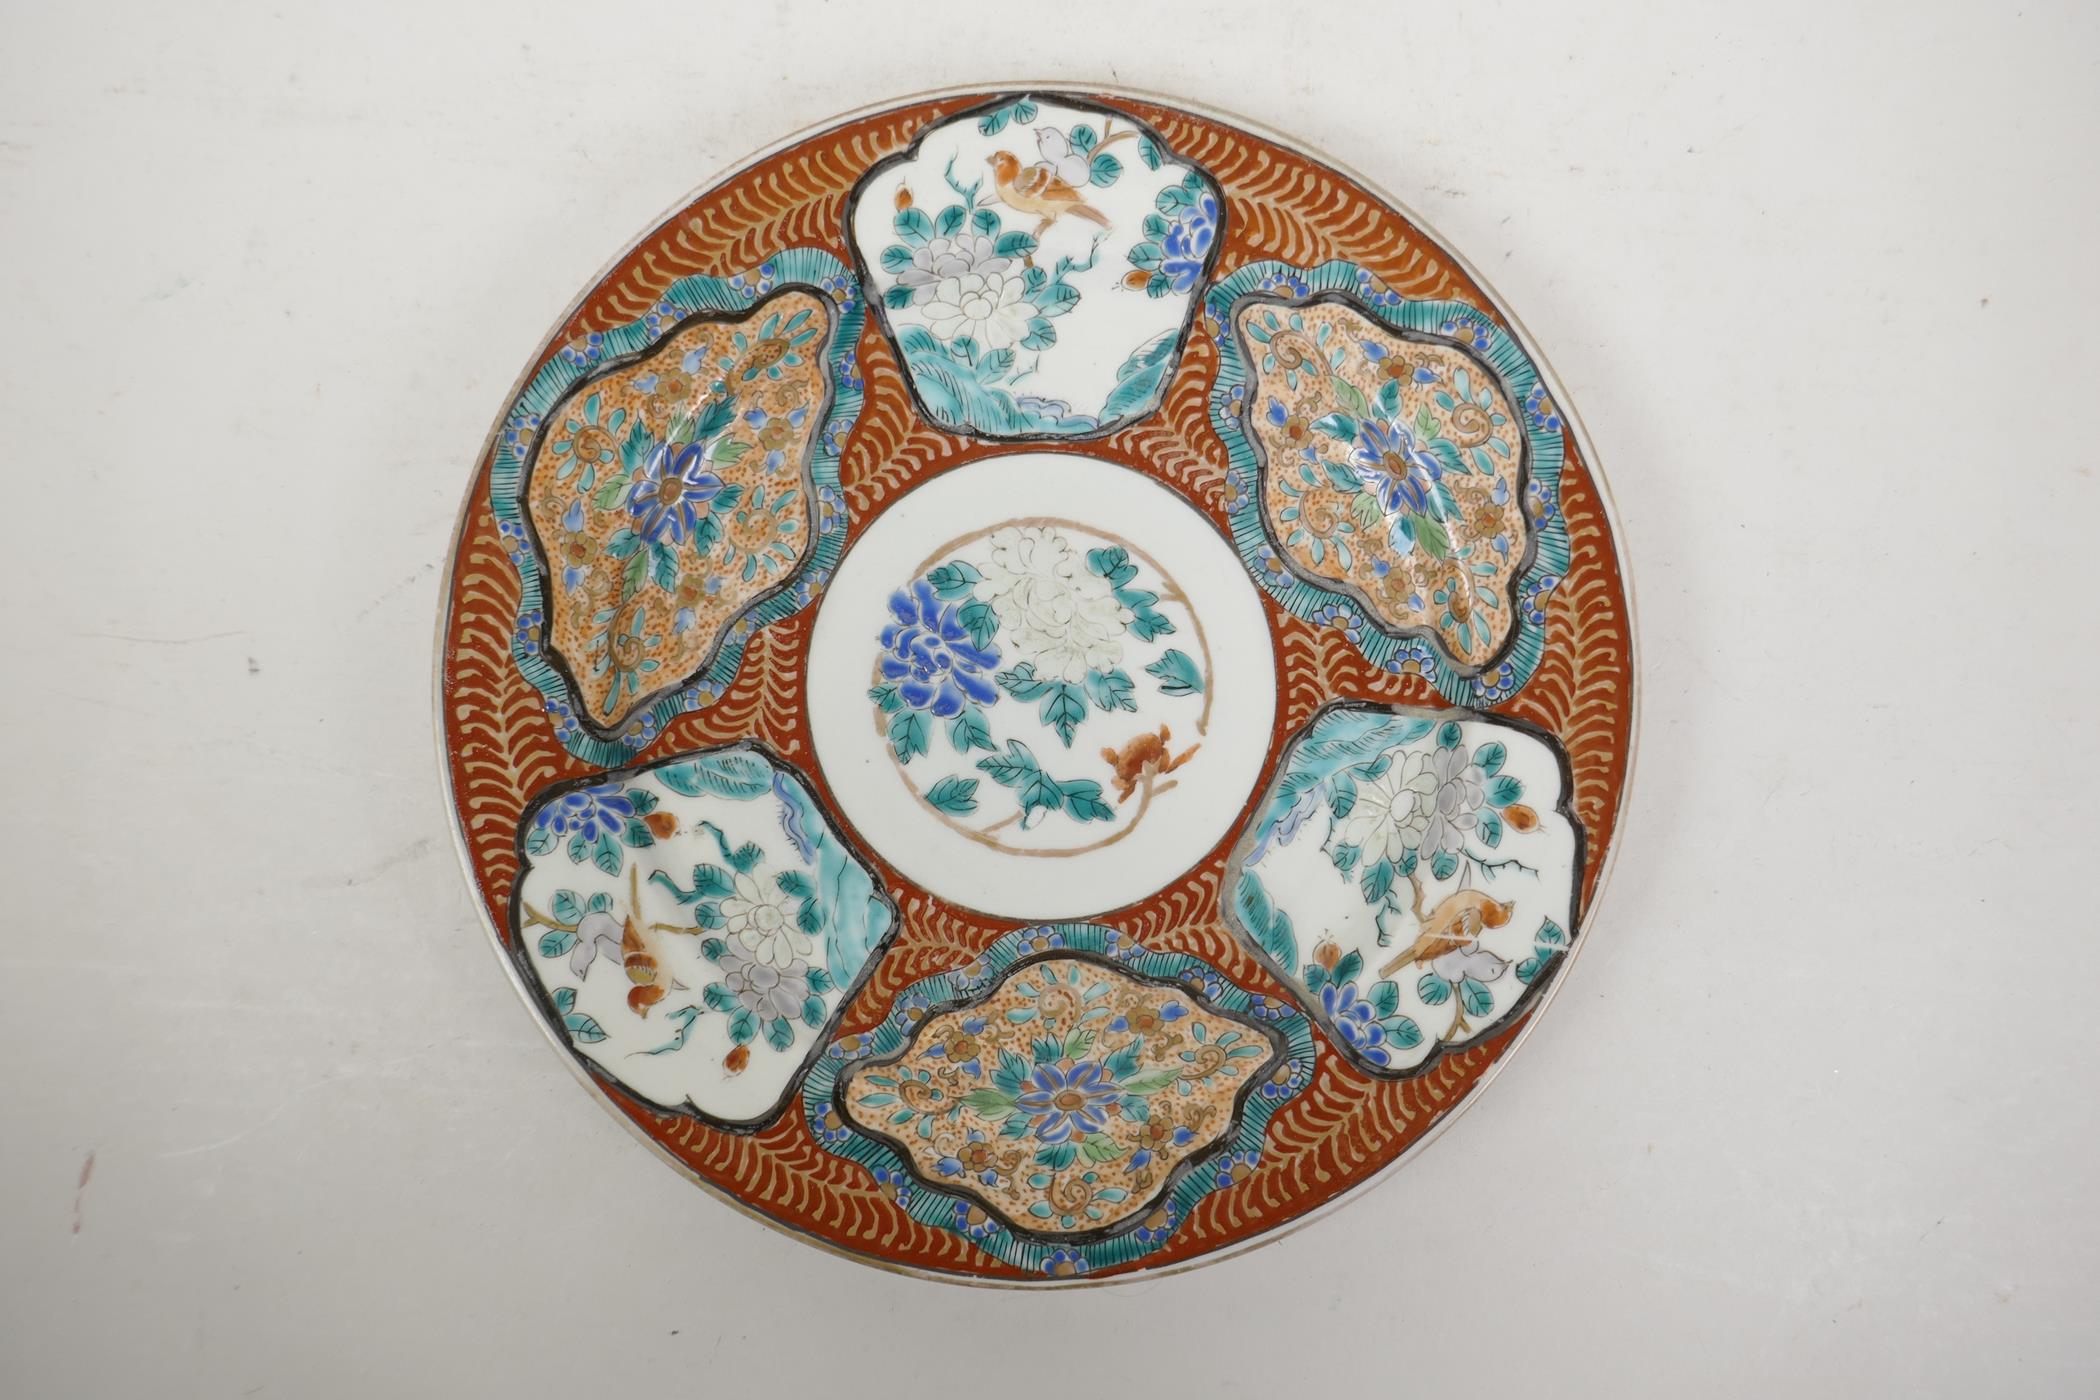 A Chinese porcelain cabinet plate with decorative panels depicting birds and flowers, 6 character